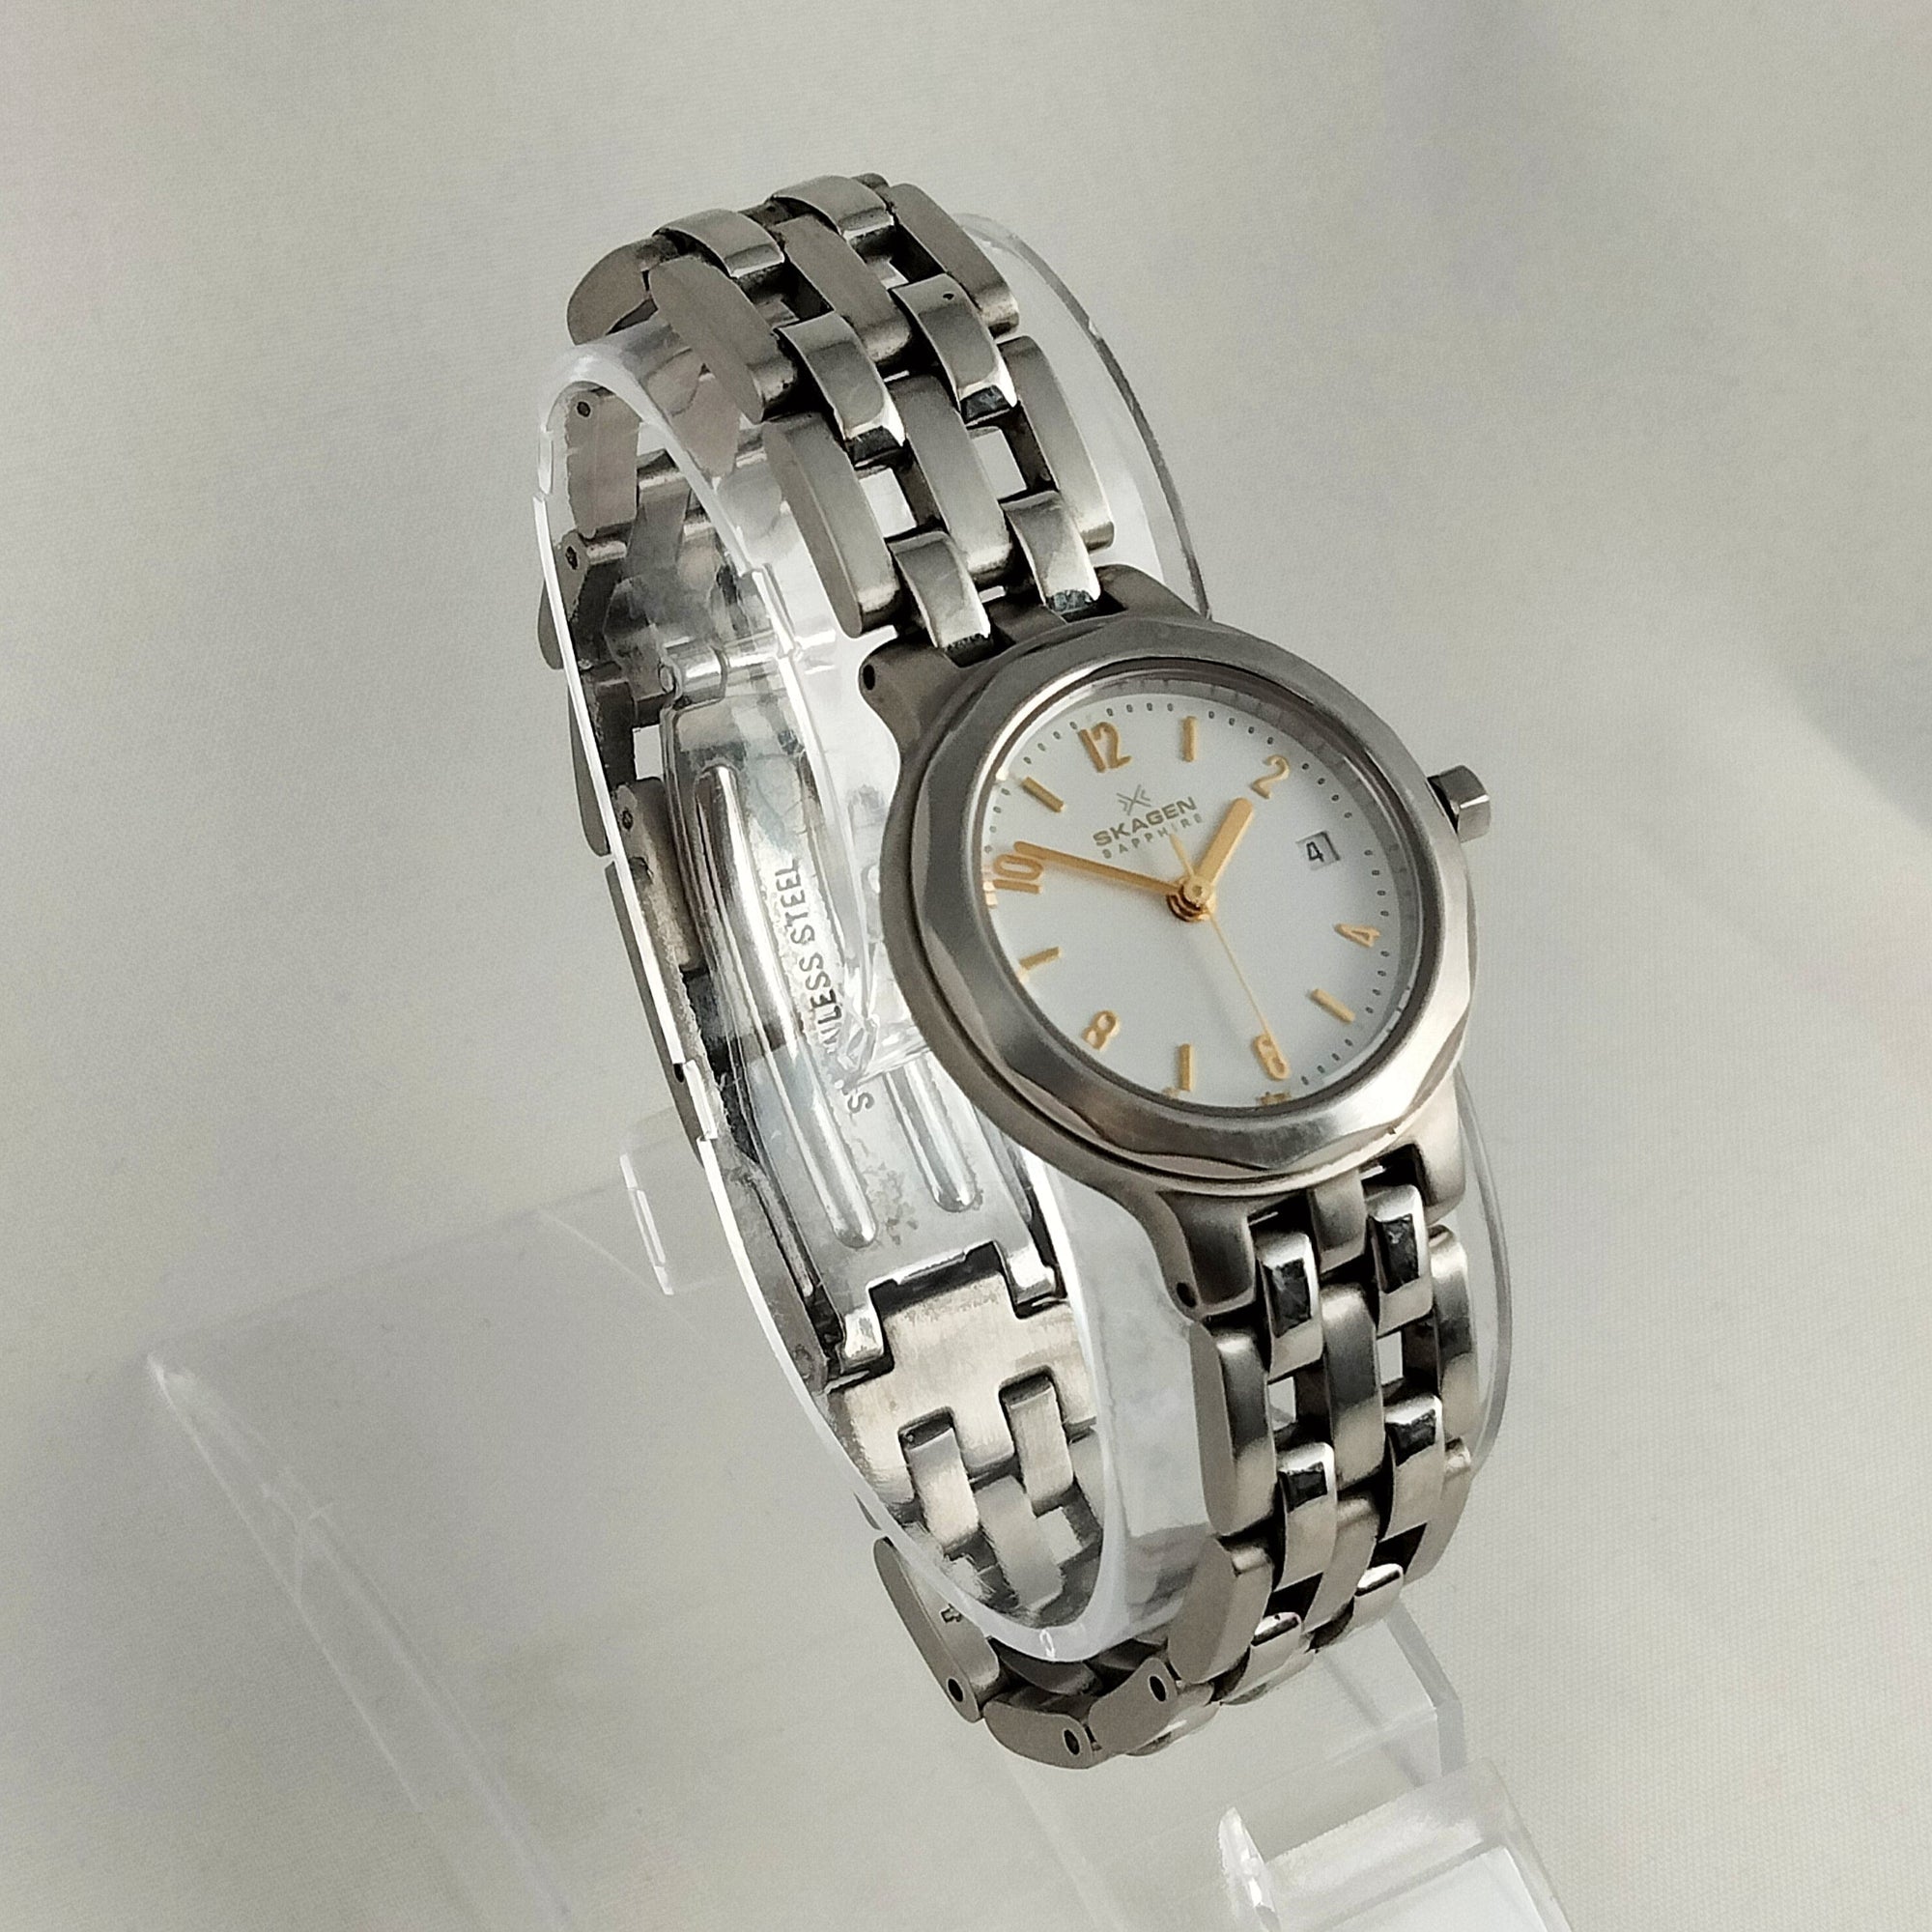 I Like Mikes Mid Century Modern Watches Skagen Unisex Stainless Steel Watch, Gold Tone Hands and Hour Markers, Bracelet Strap